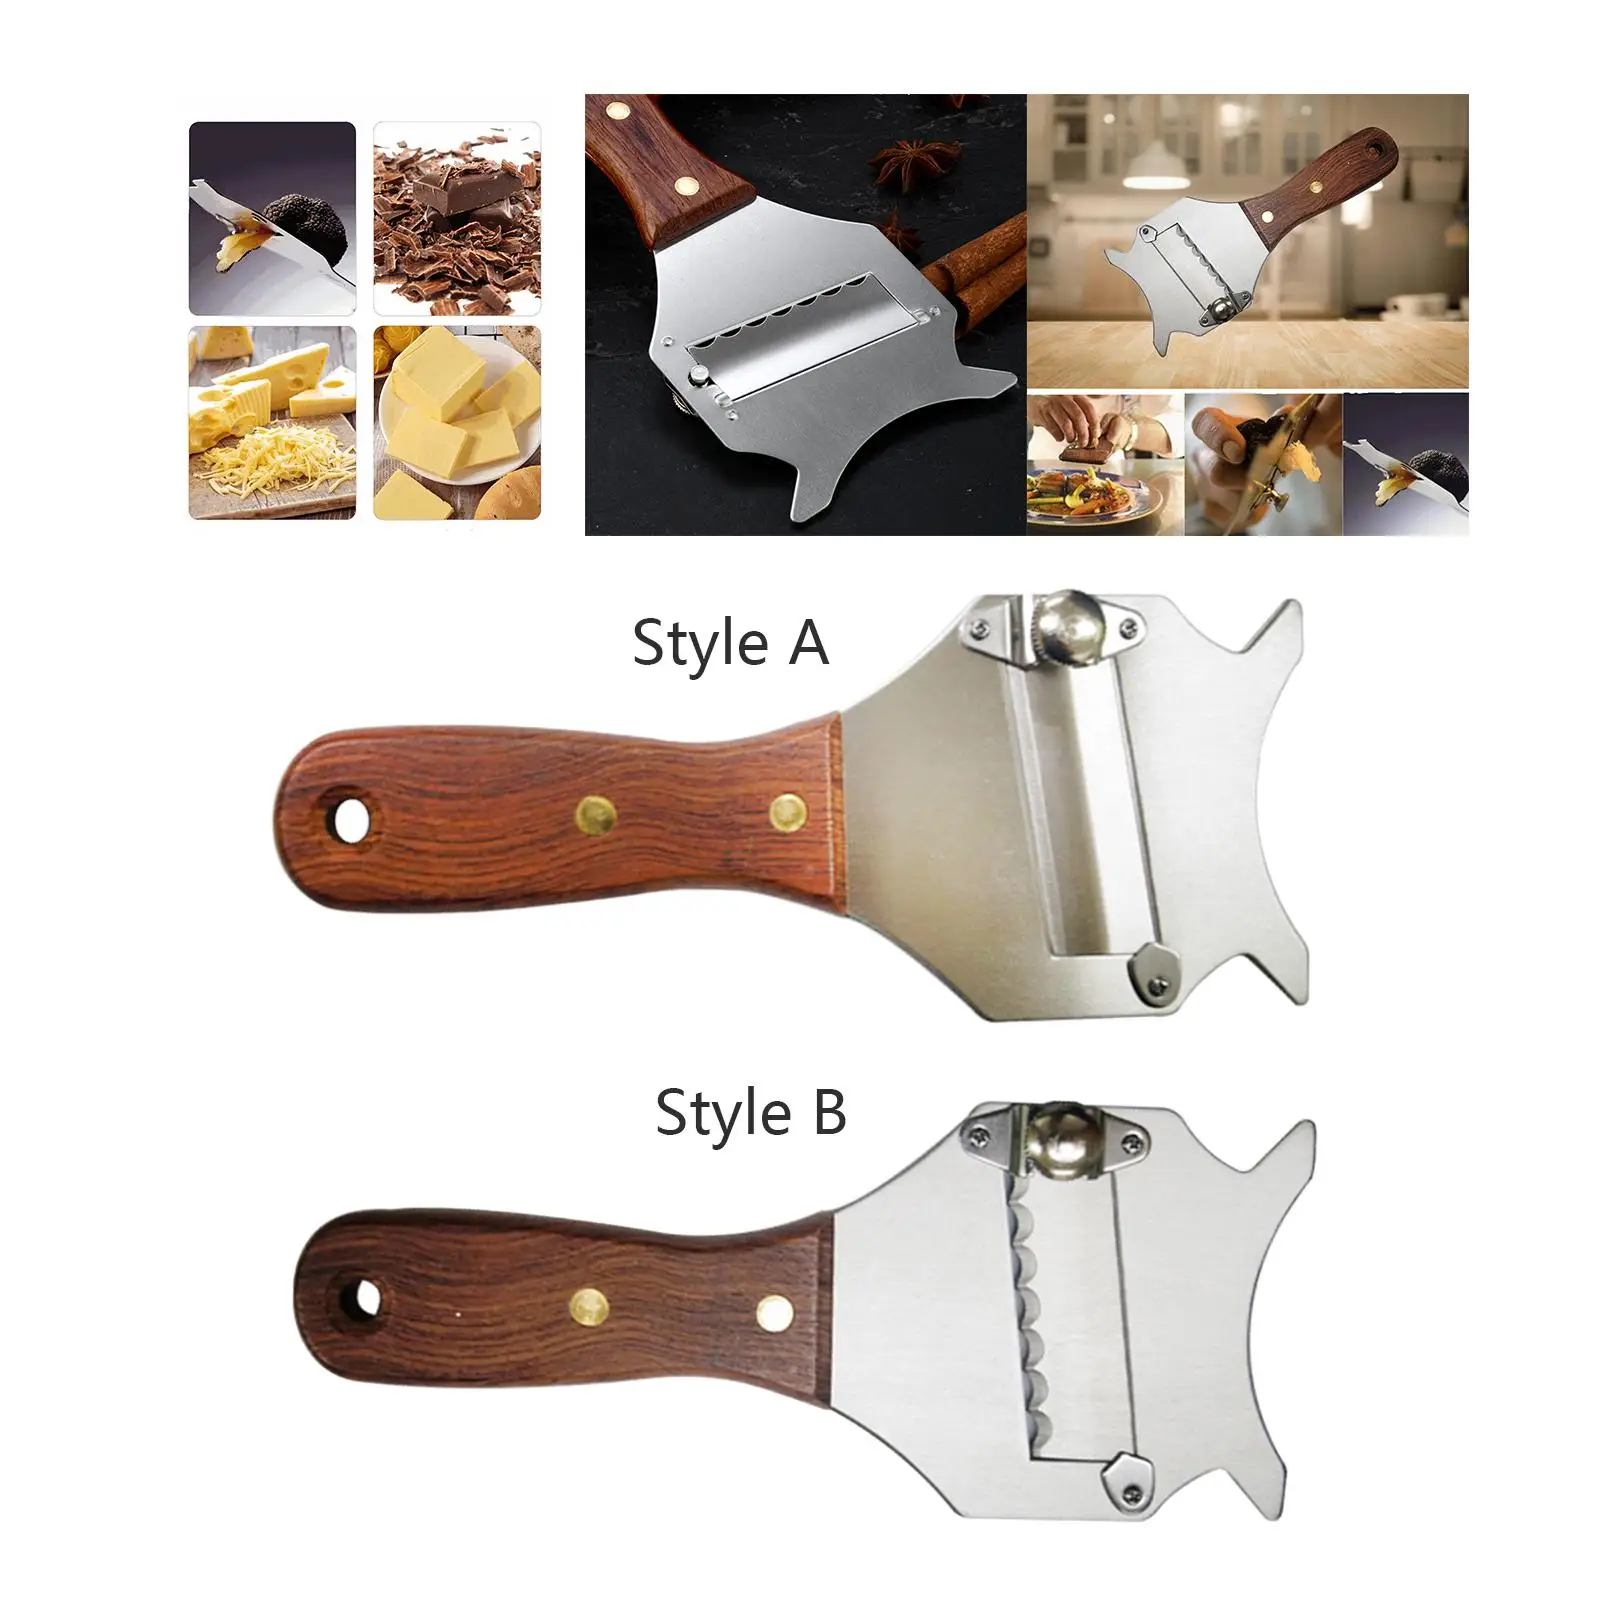 Professional Stainless Steel Truffle Slicer Baking Tools Adjustable Cheese Chocolate Slicer